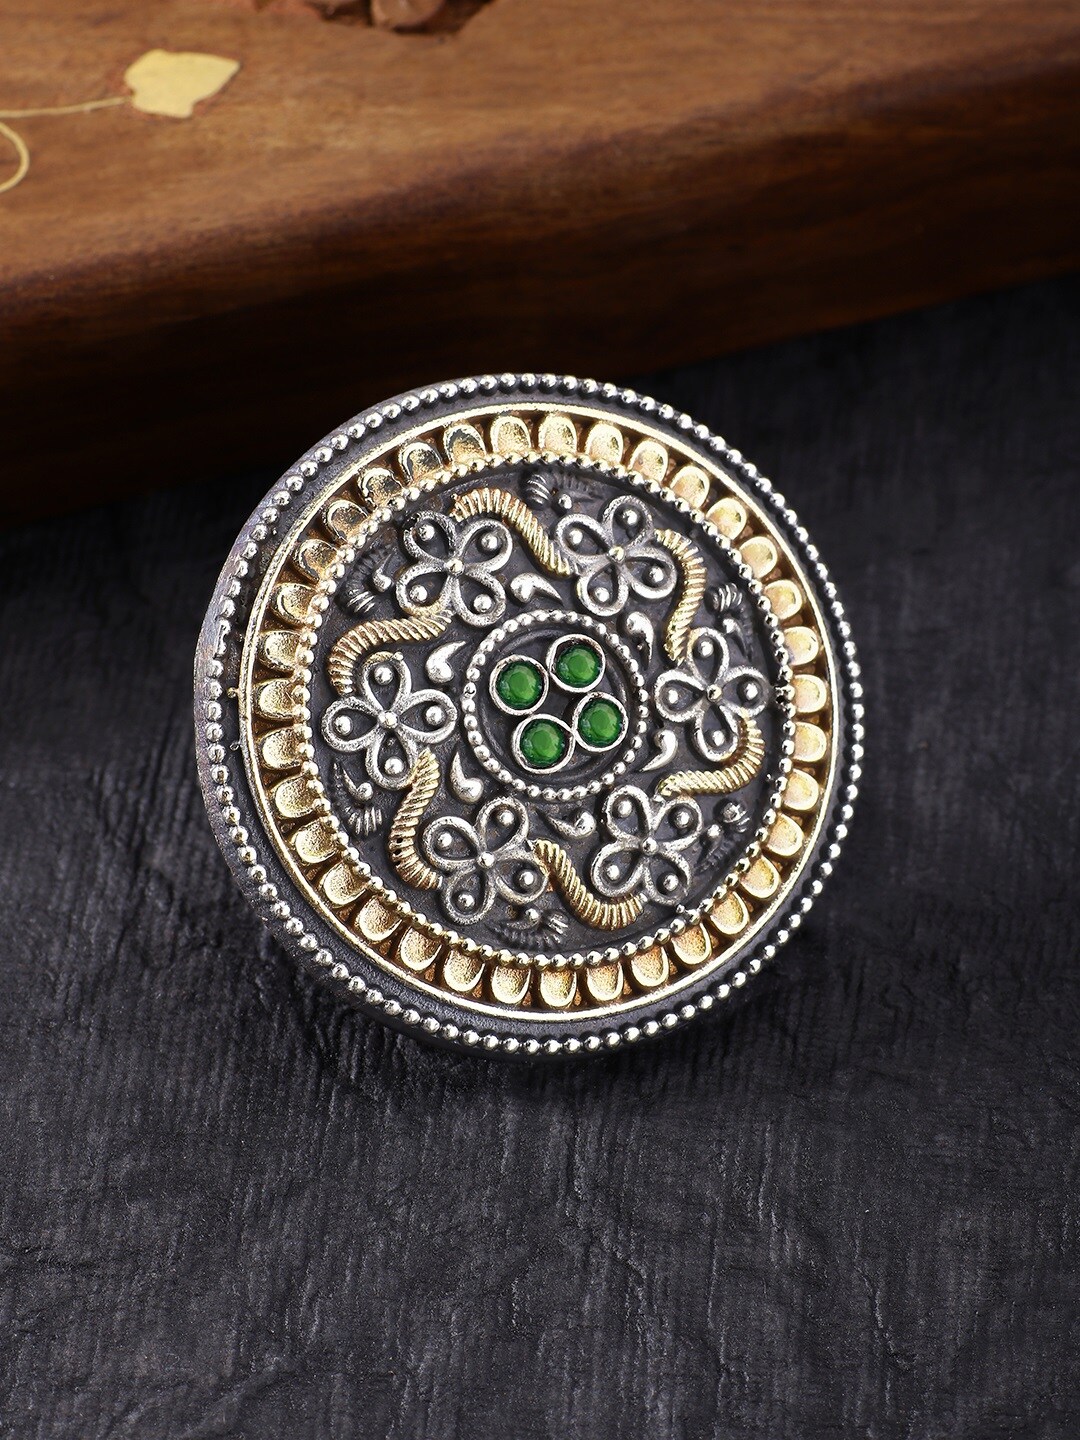 Peora Green & Bronze-Toned Silver-Plated Boho Vintage Adjustable Finger Ring Price in India